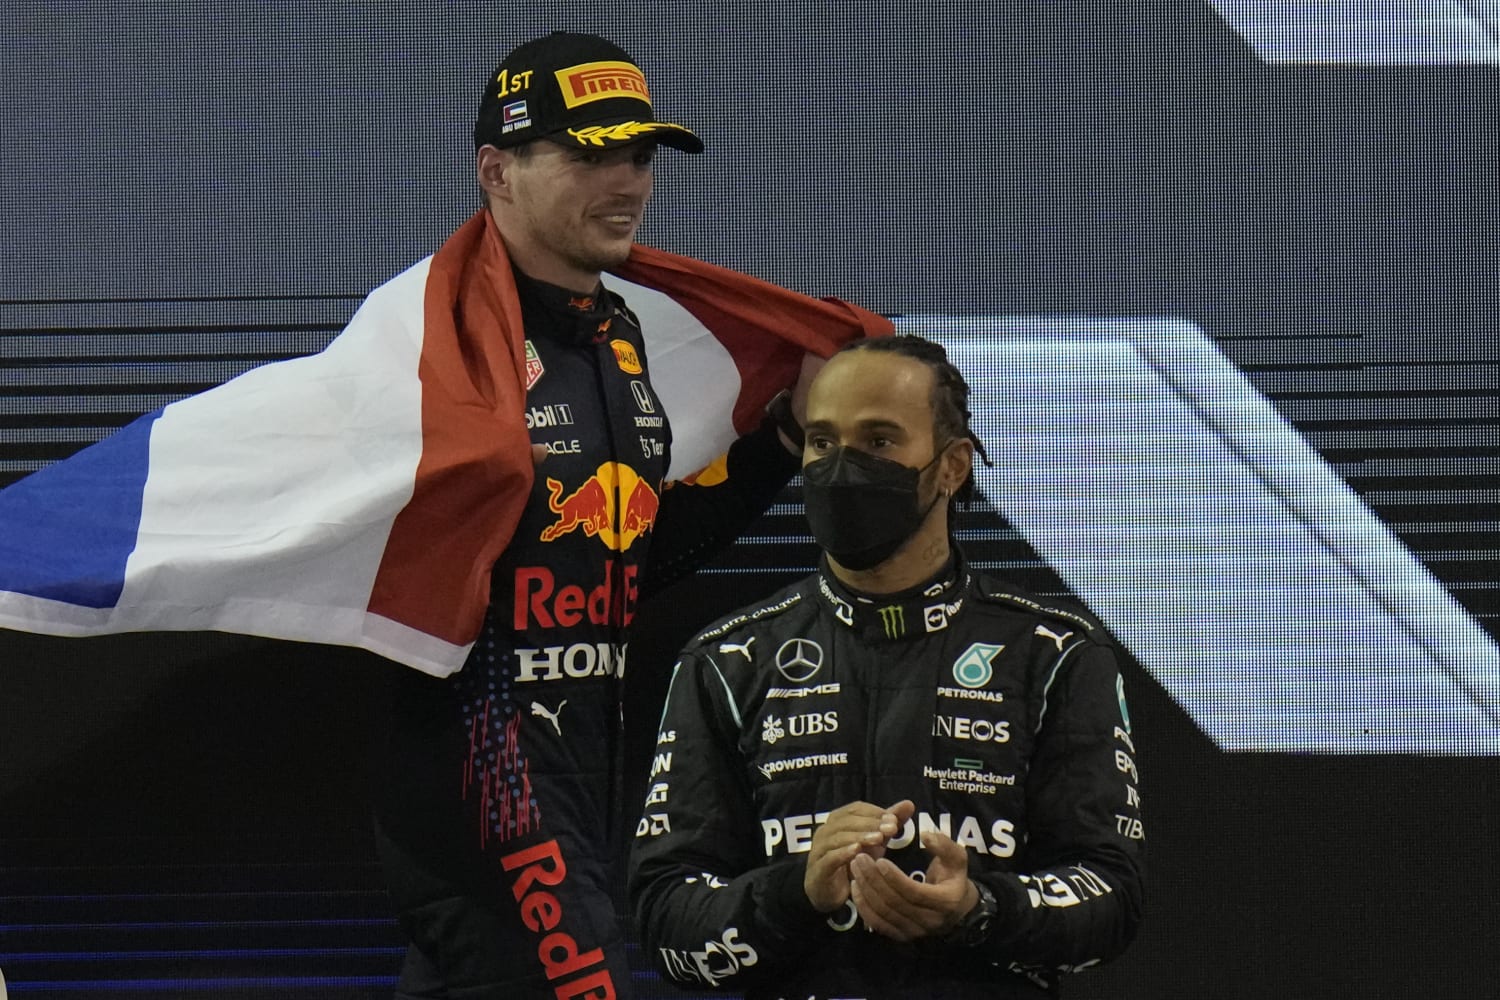 Verstappen wins Formula 1 title with dramatic, controversial last lap pass of Hamilton